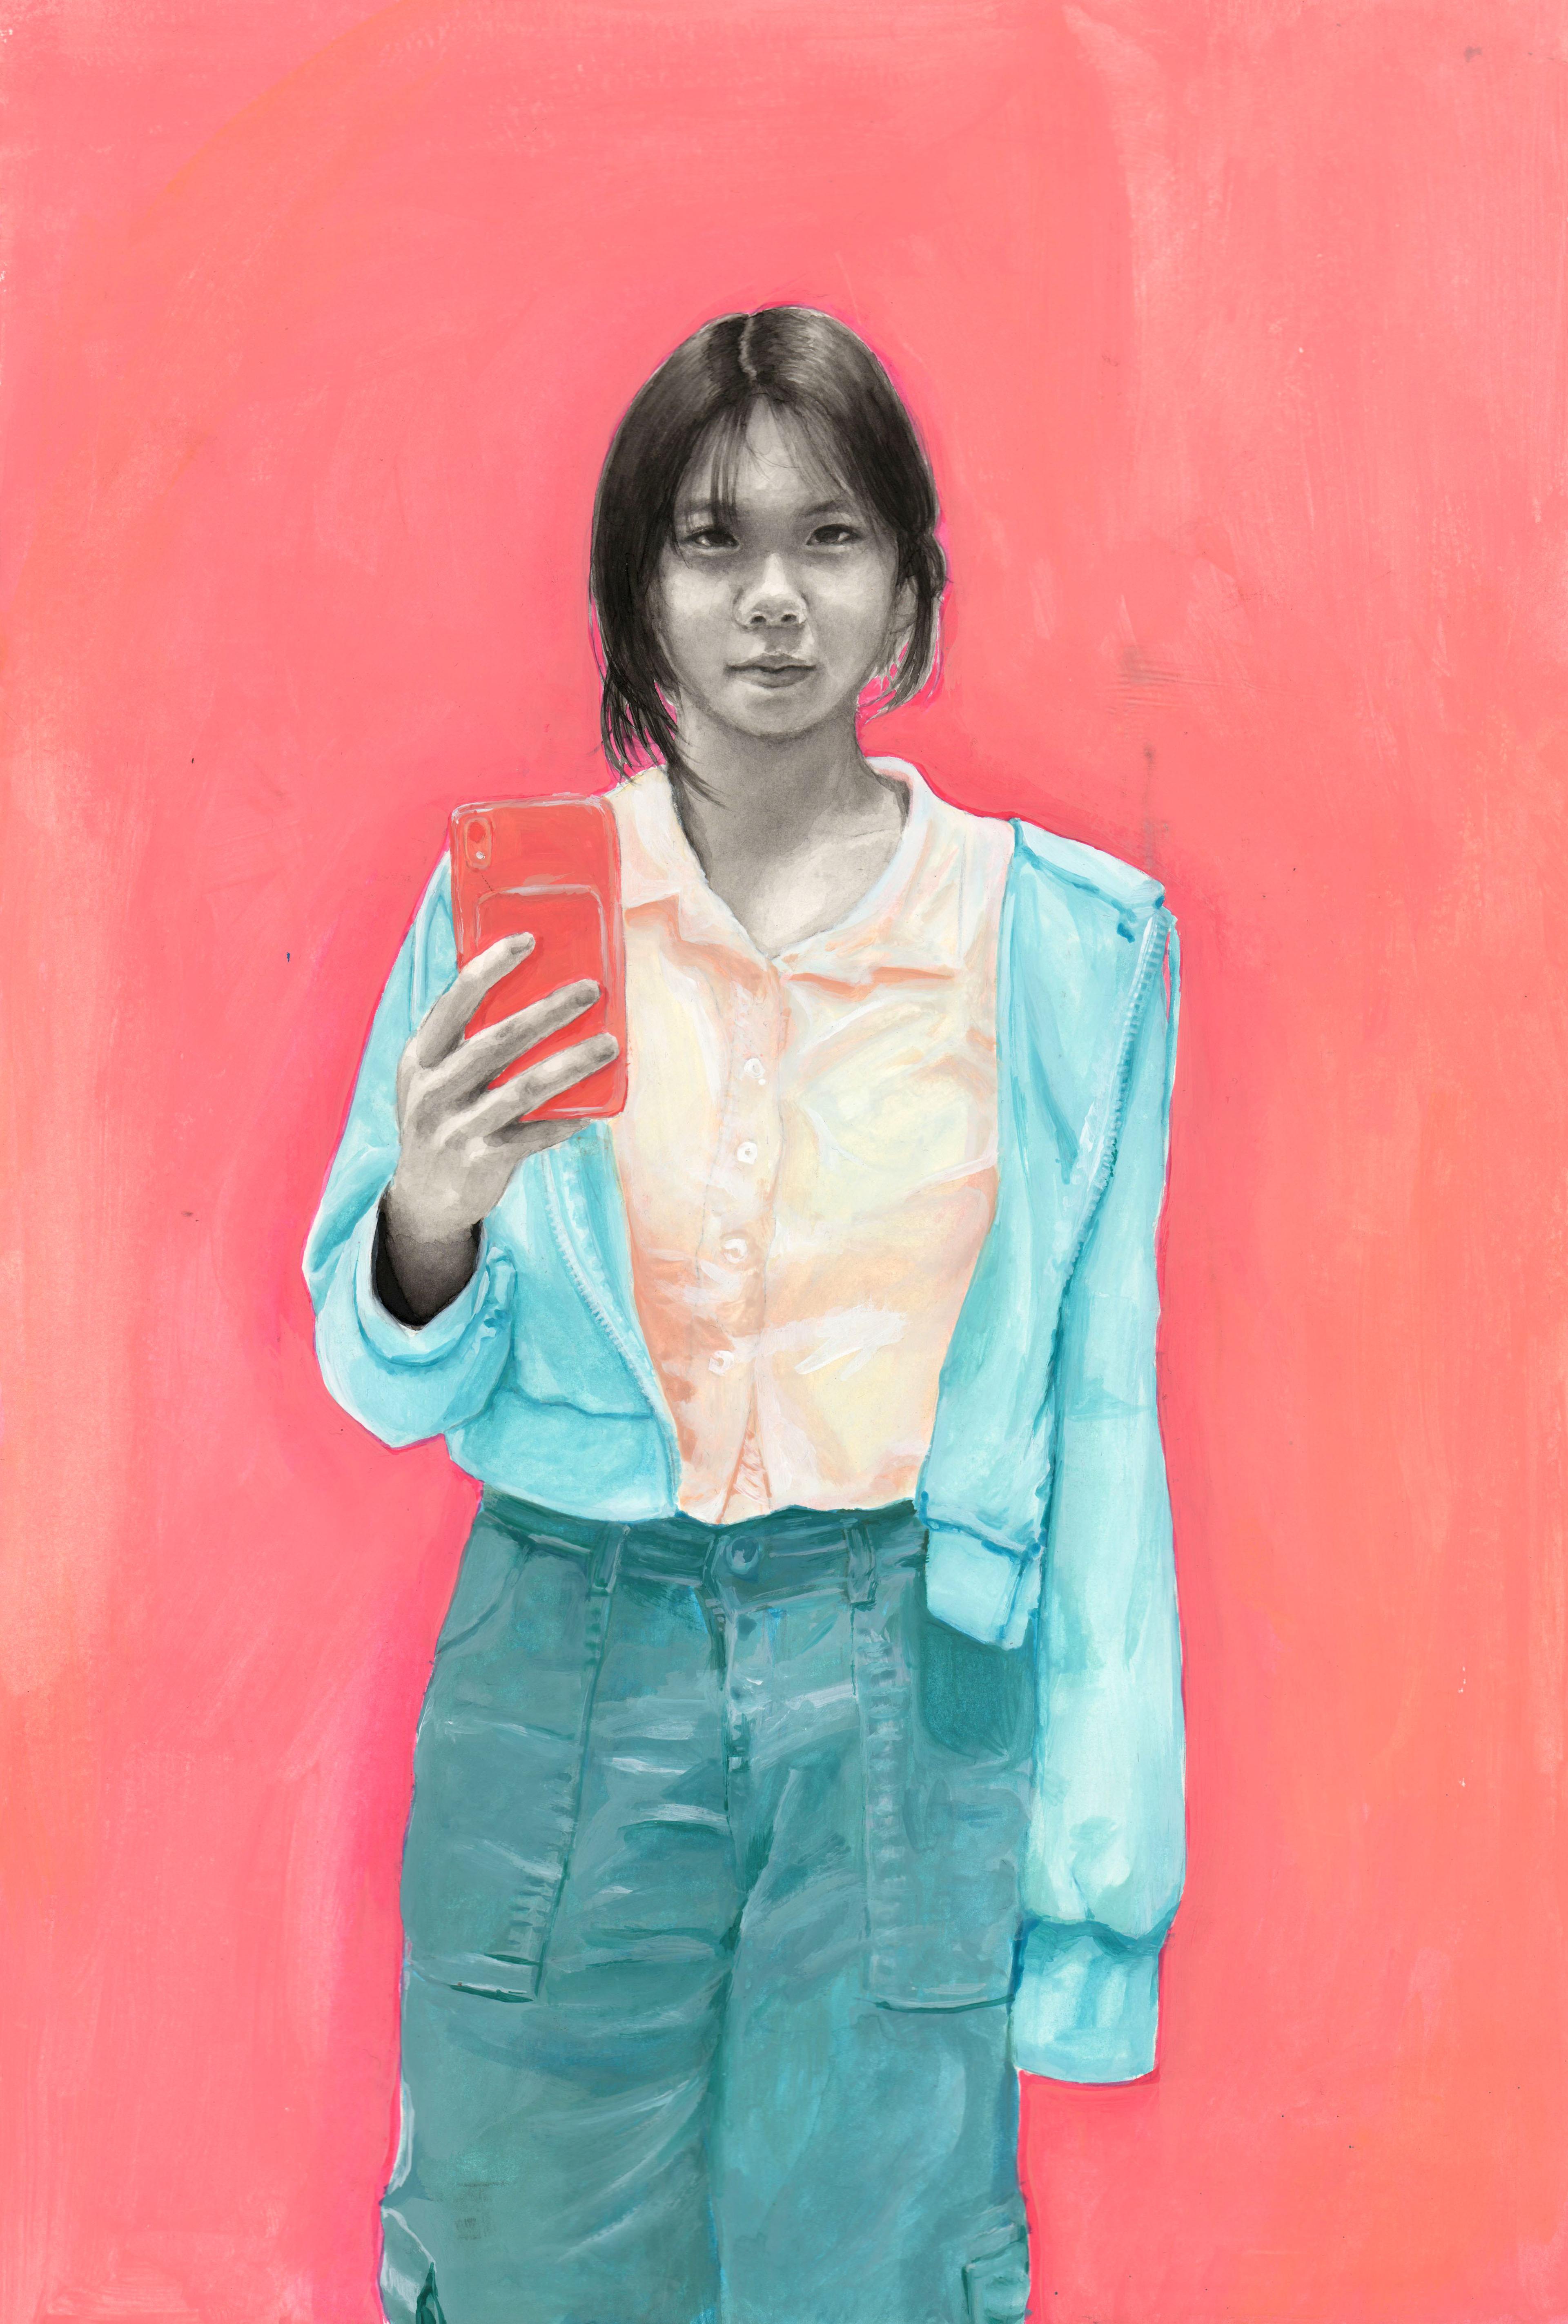 Watercolor-and-tempera painting of an adolescent Asian female standing in front of a pinkish red background, facing the viewer. She has short dark hair down to her chin, and holds a red smartphone up in front of her in her right hand, as if she is taking a selfie. She wears a light teal jacket, a light yellow buttoned shirt, and baggy, blue-green cargo pants. Her skin is painted in gray tones.